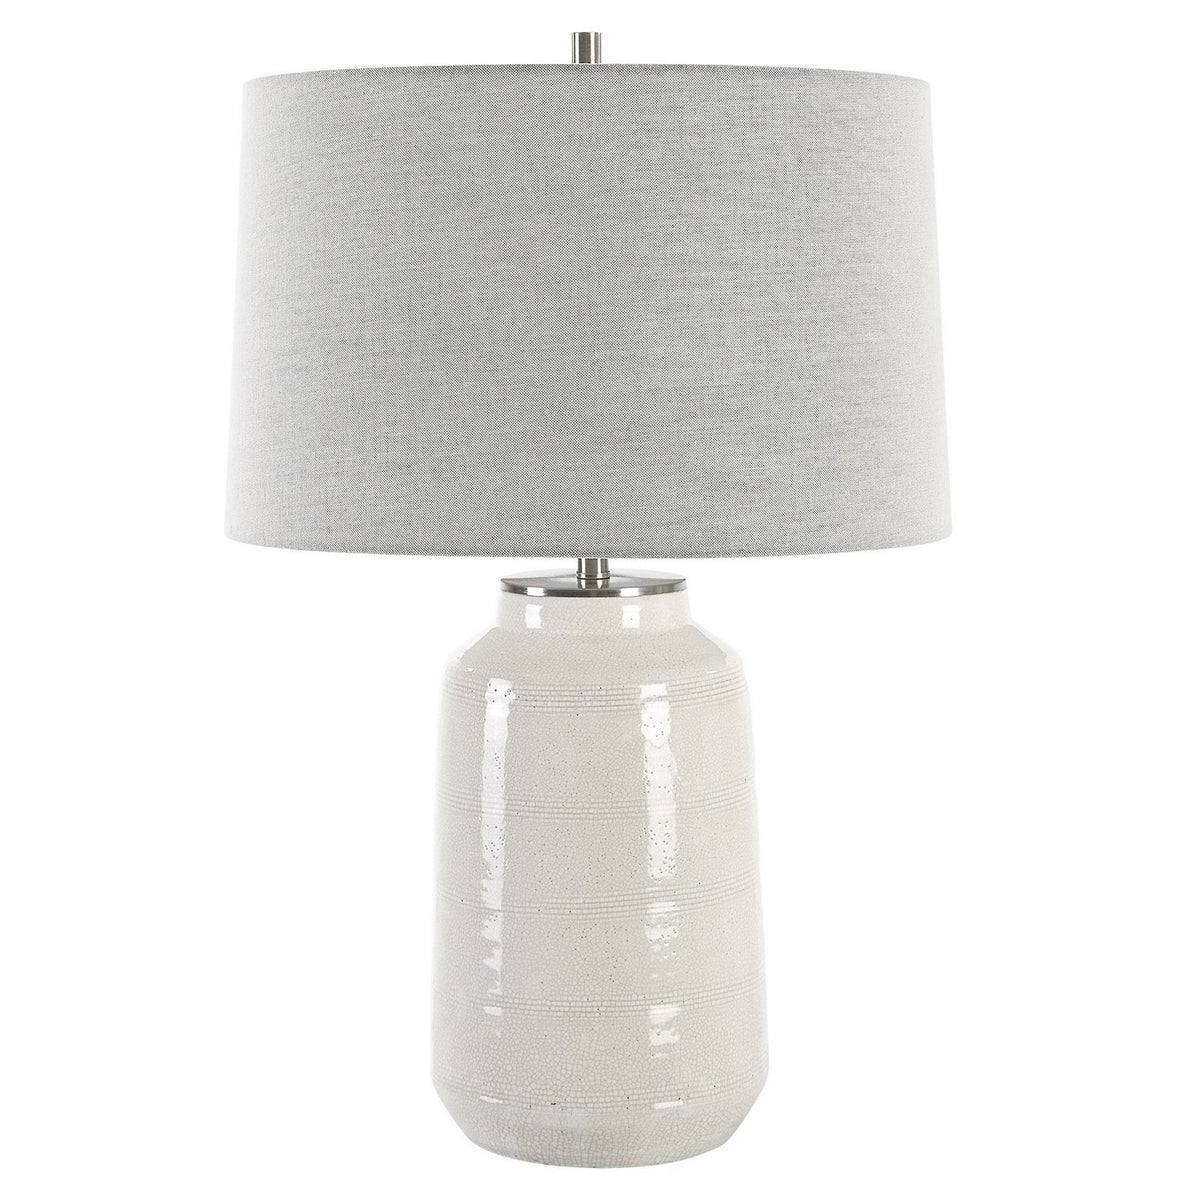 Uttermost - 30248-1 - One Light Table Lamp - Odawa - Brushed Nickel